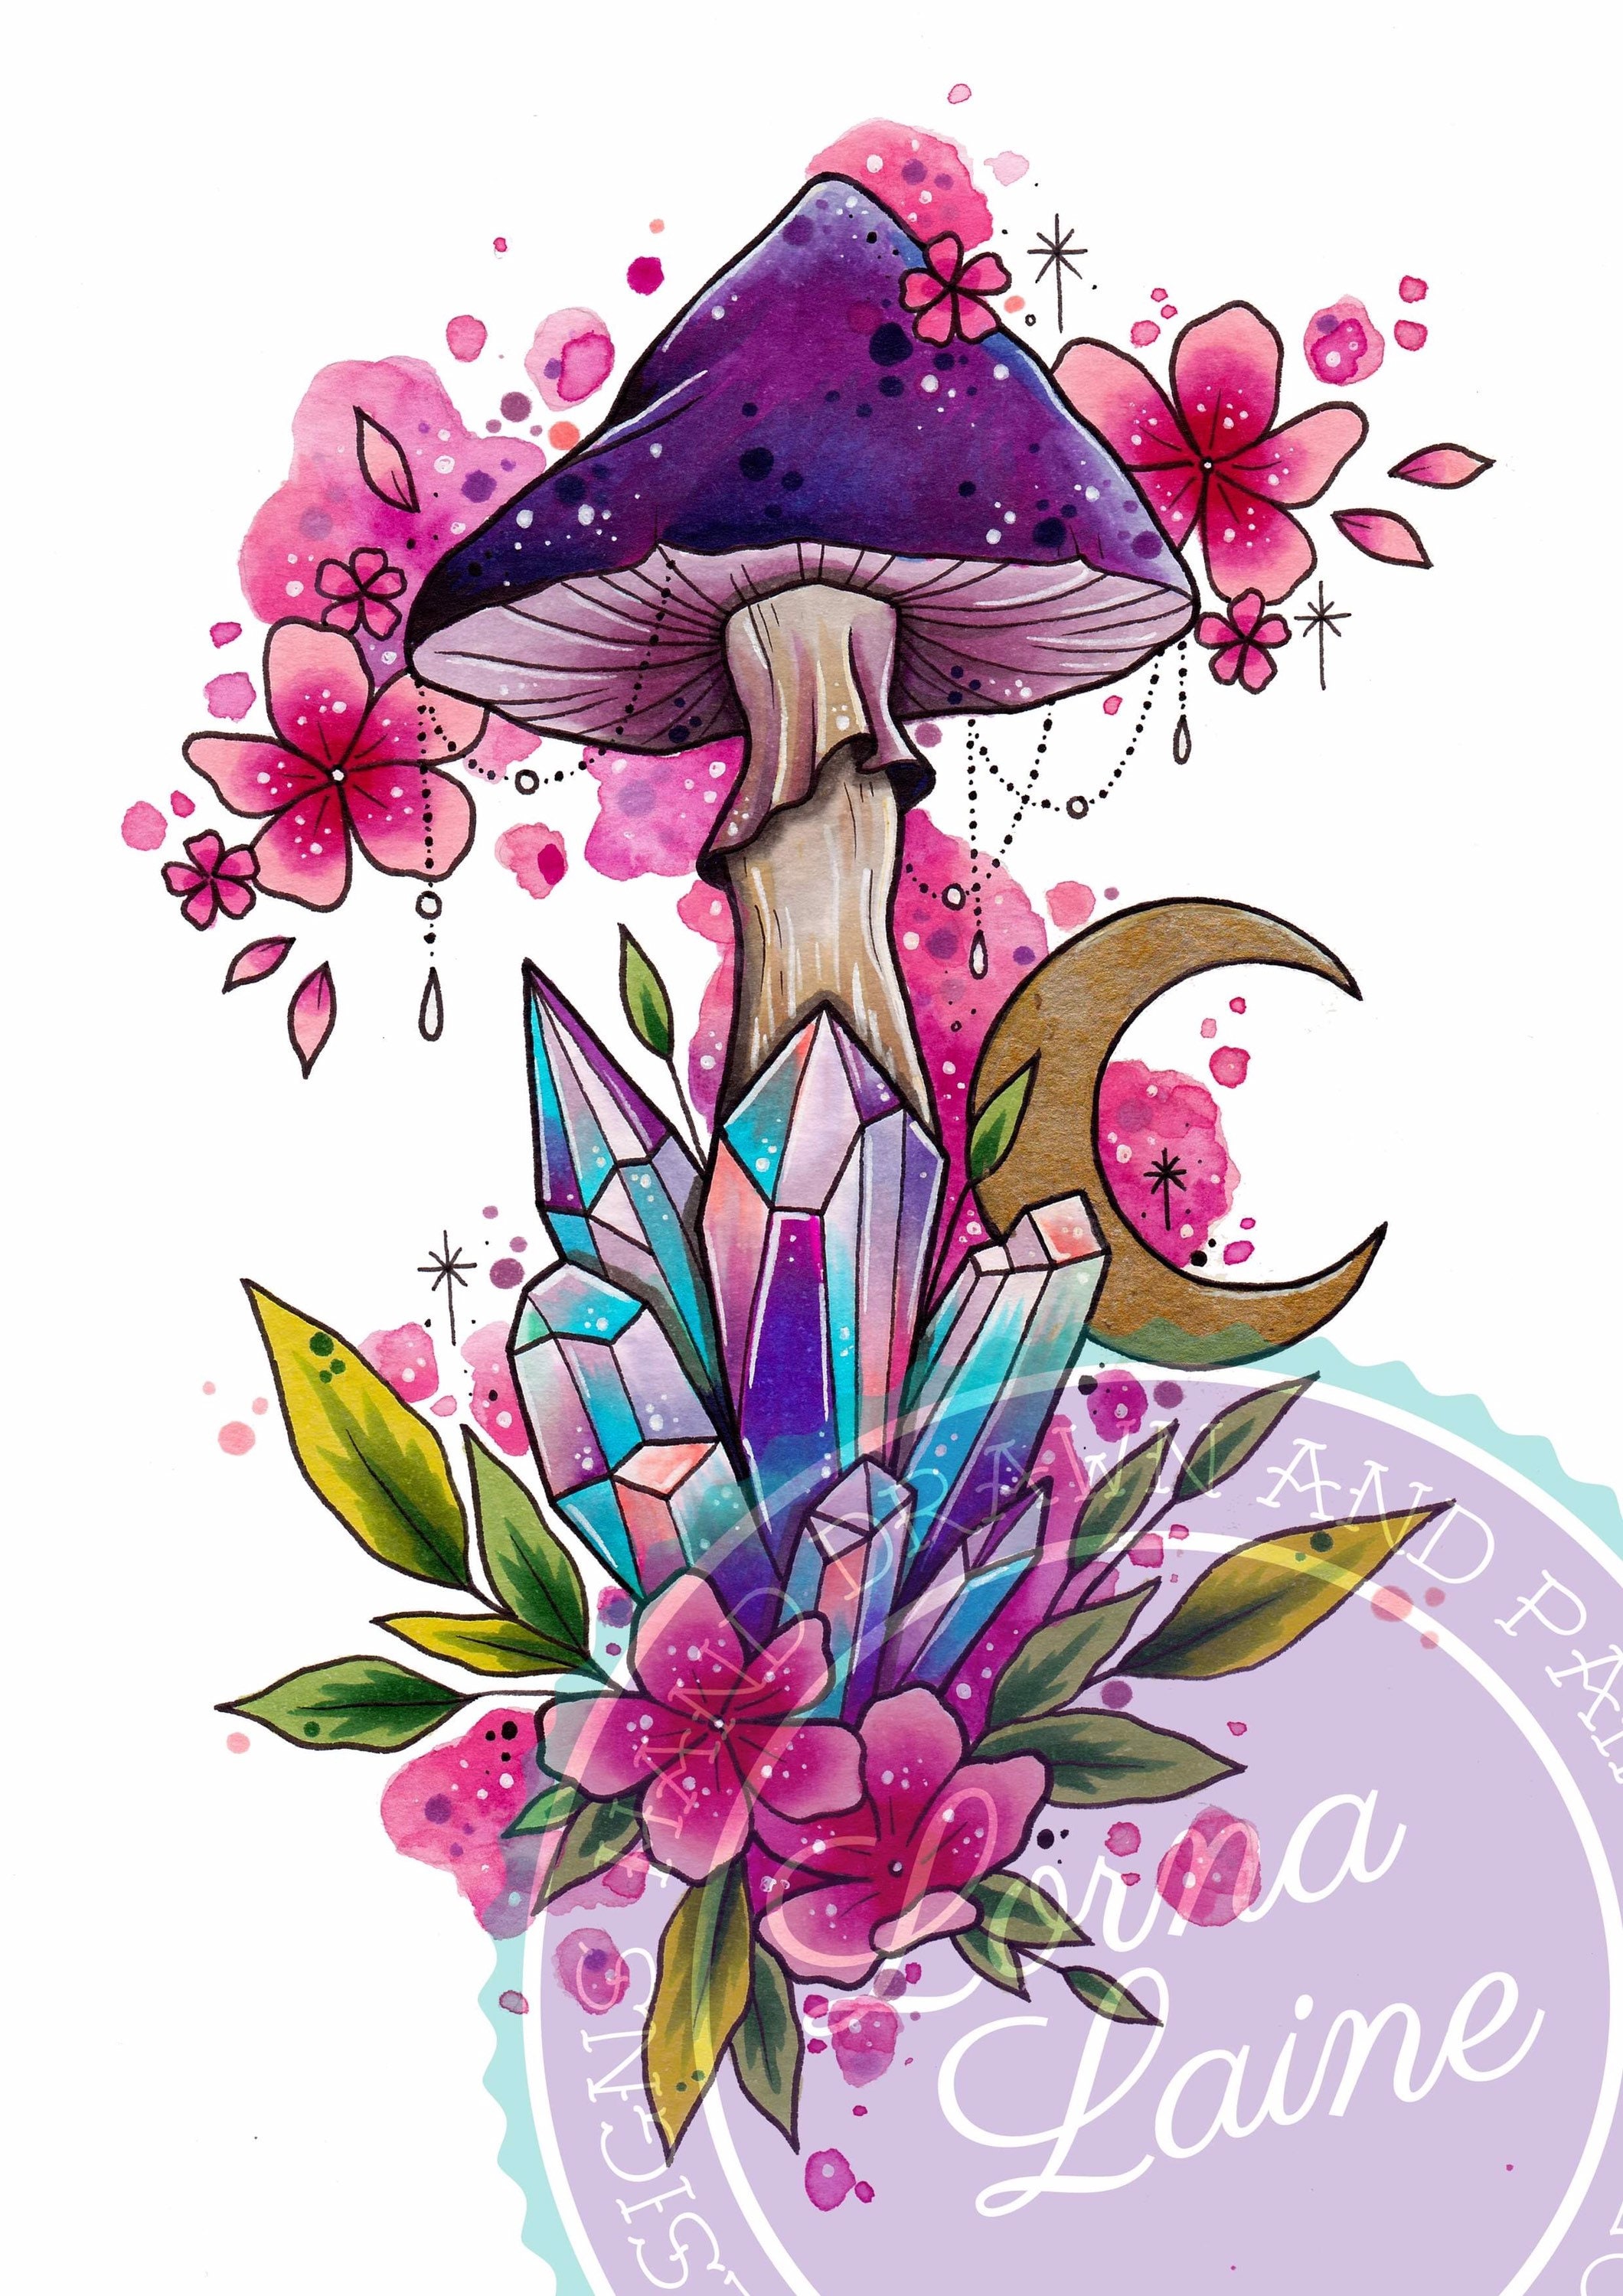 COLORFUL MUSHROOMS TATTOO SHEE - The Toy Box